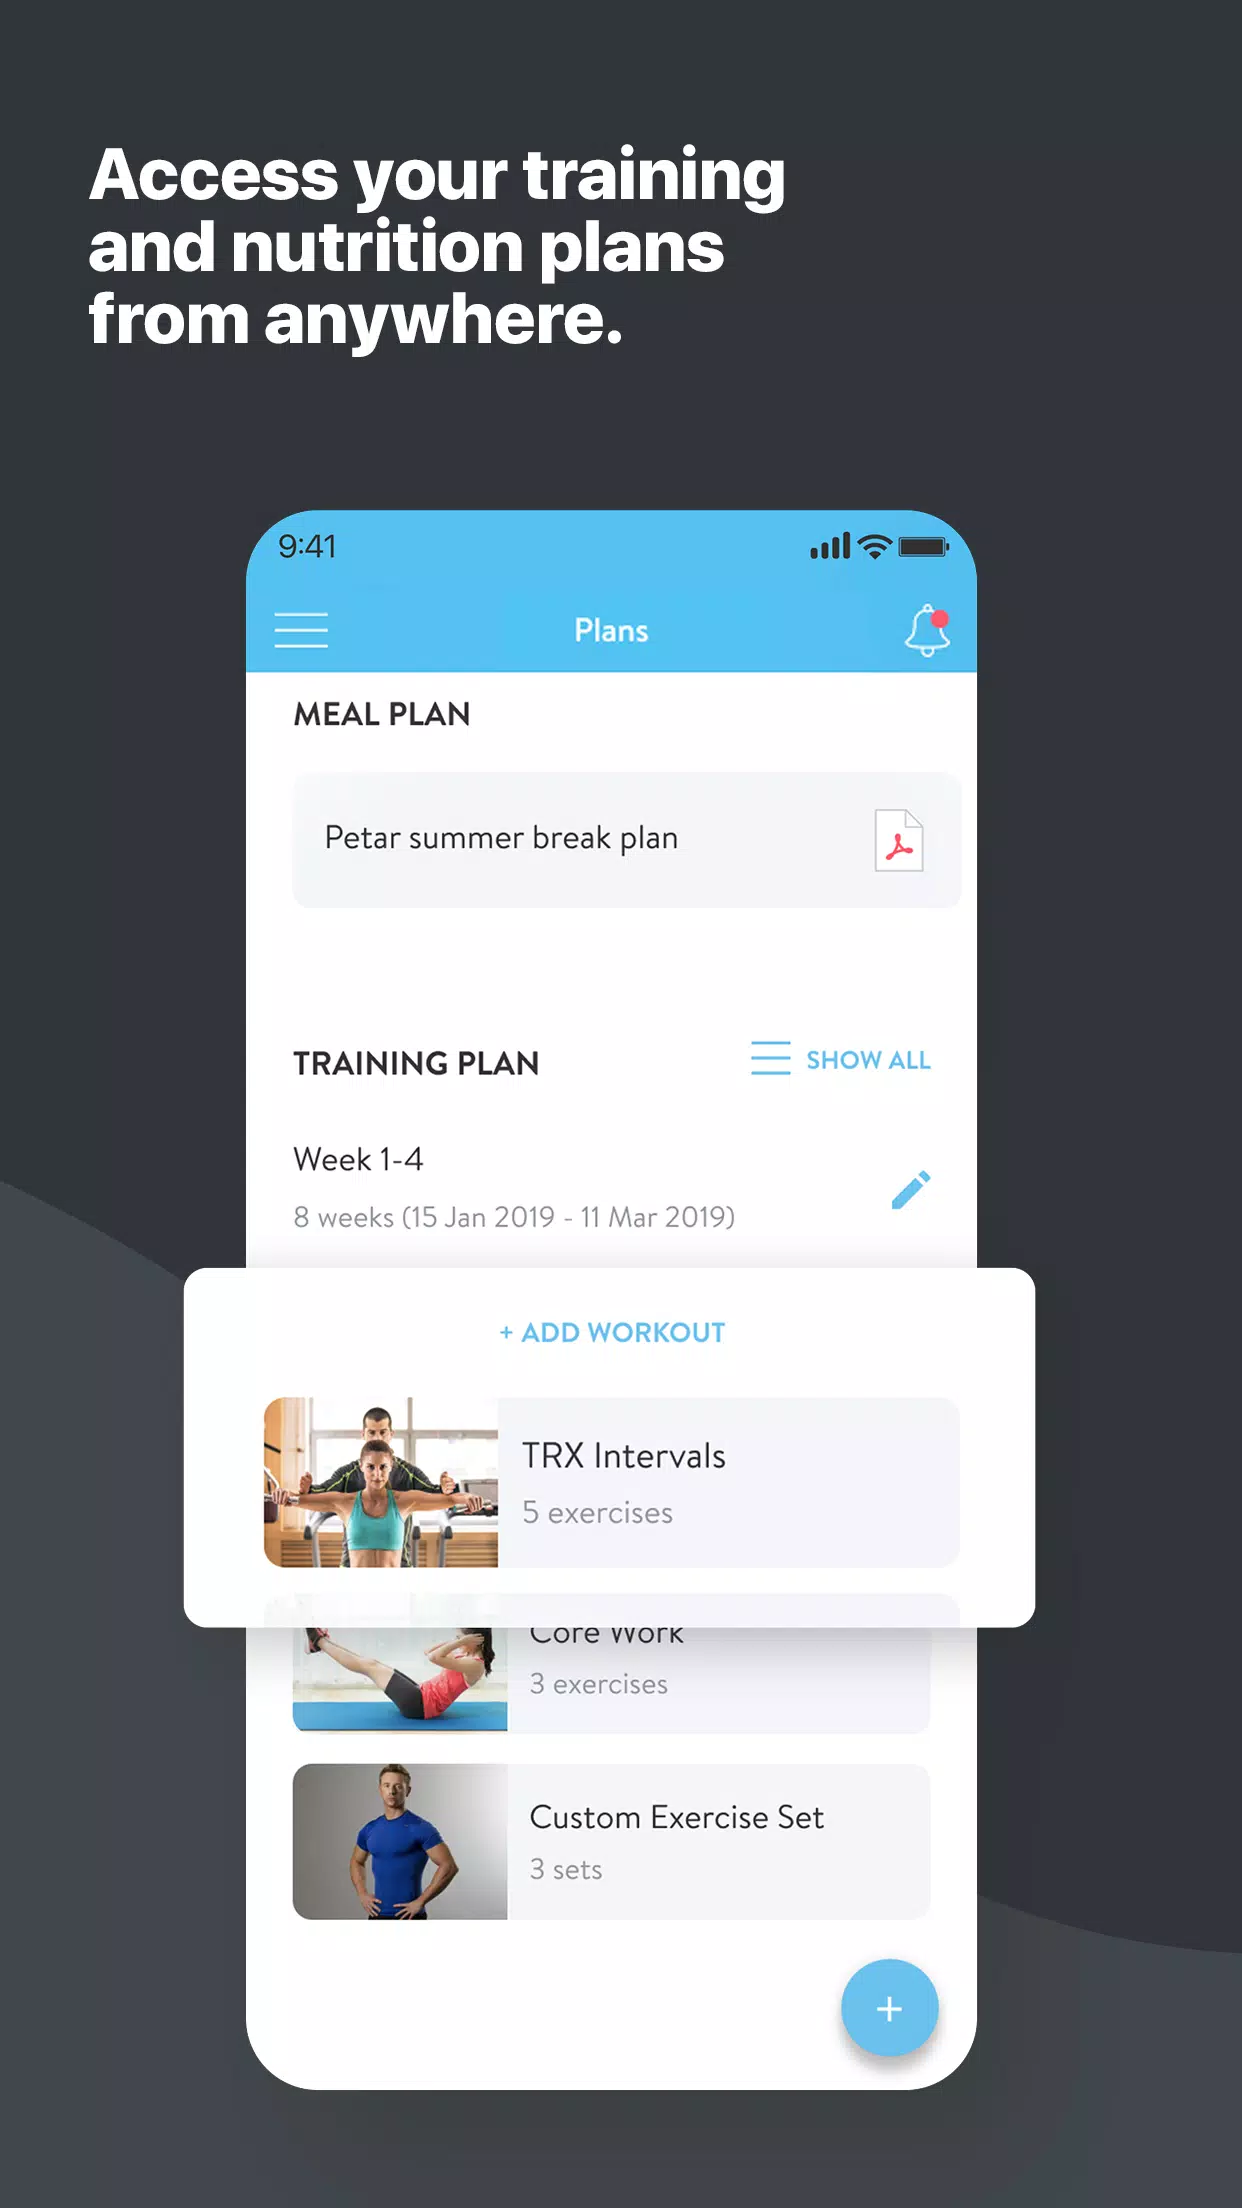 Zara Jade Fitness APK for Android Download